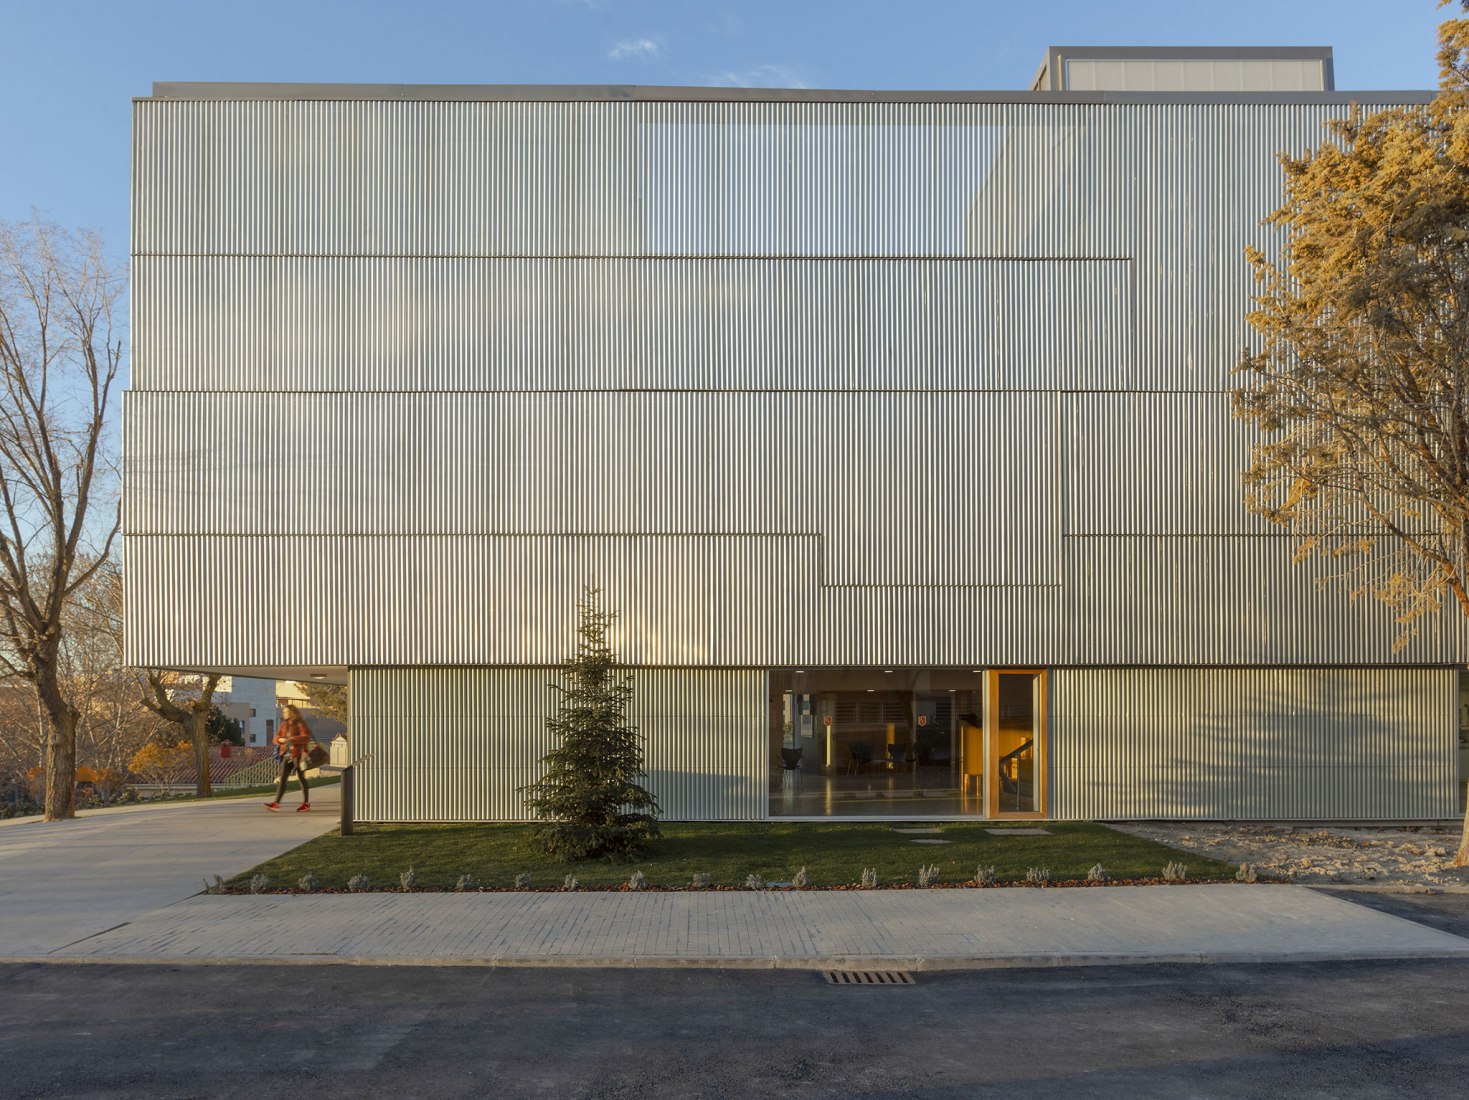 Runnymede College Campus by Rojo/Fernández-Shaw, arquitectos. Photograph by Luis Asín